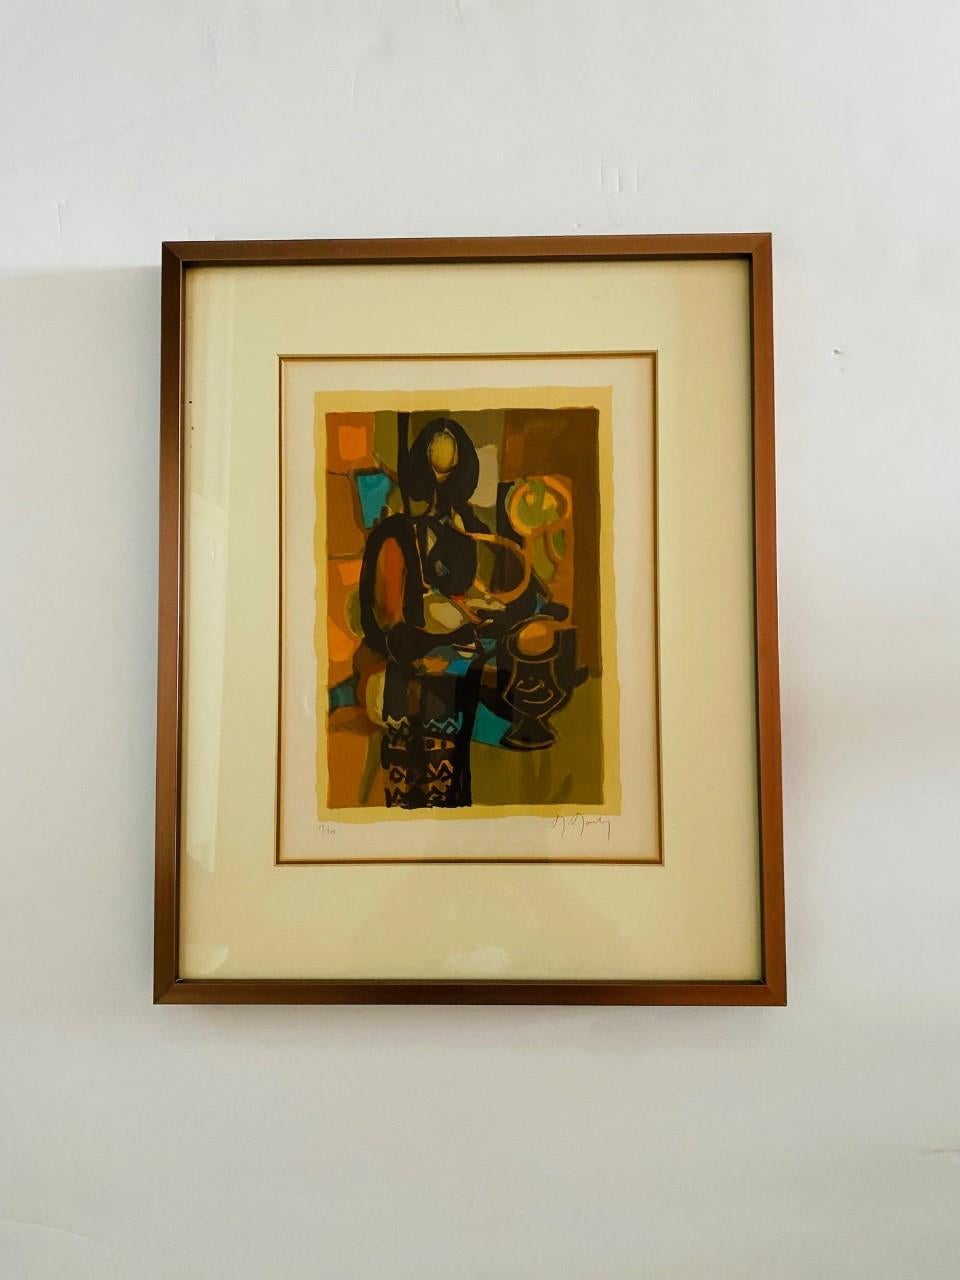 
Impressive artist, Last Living Student of Picasso & Lipchitz. Marcel Mouly, born in Paris in 1918, is heavily influenced by the work of Picasso, Matisse, and Braque. He studied painting at the French Academies and later became the protogé of the